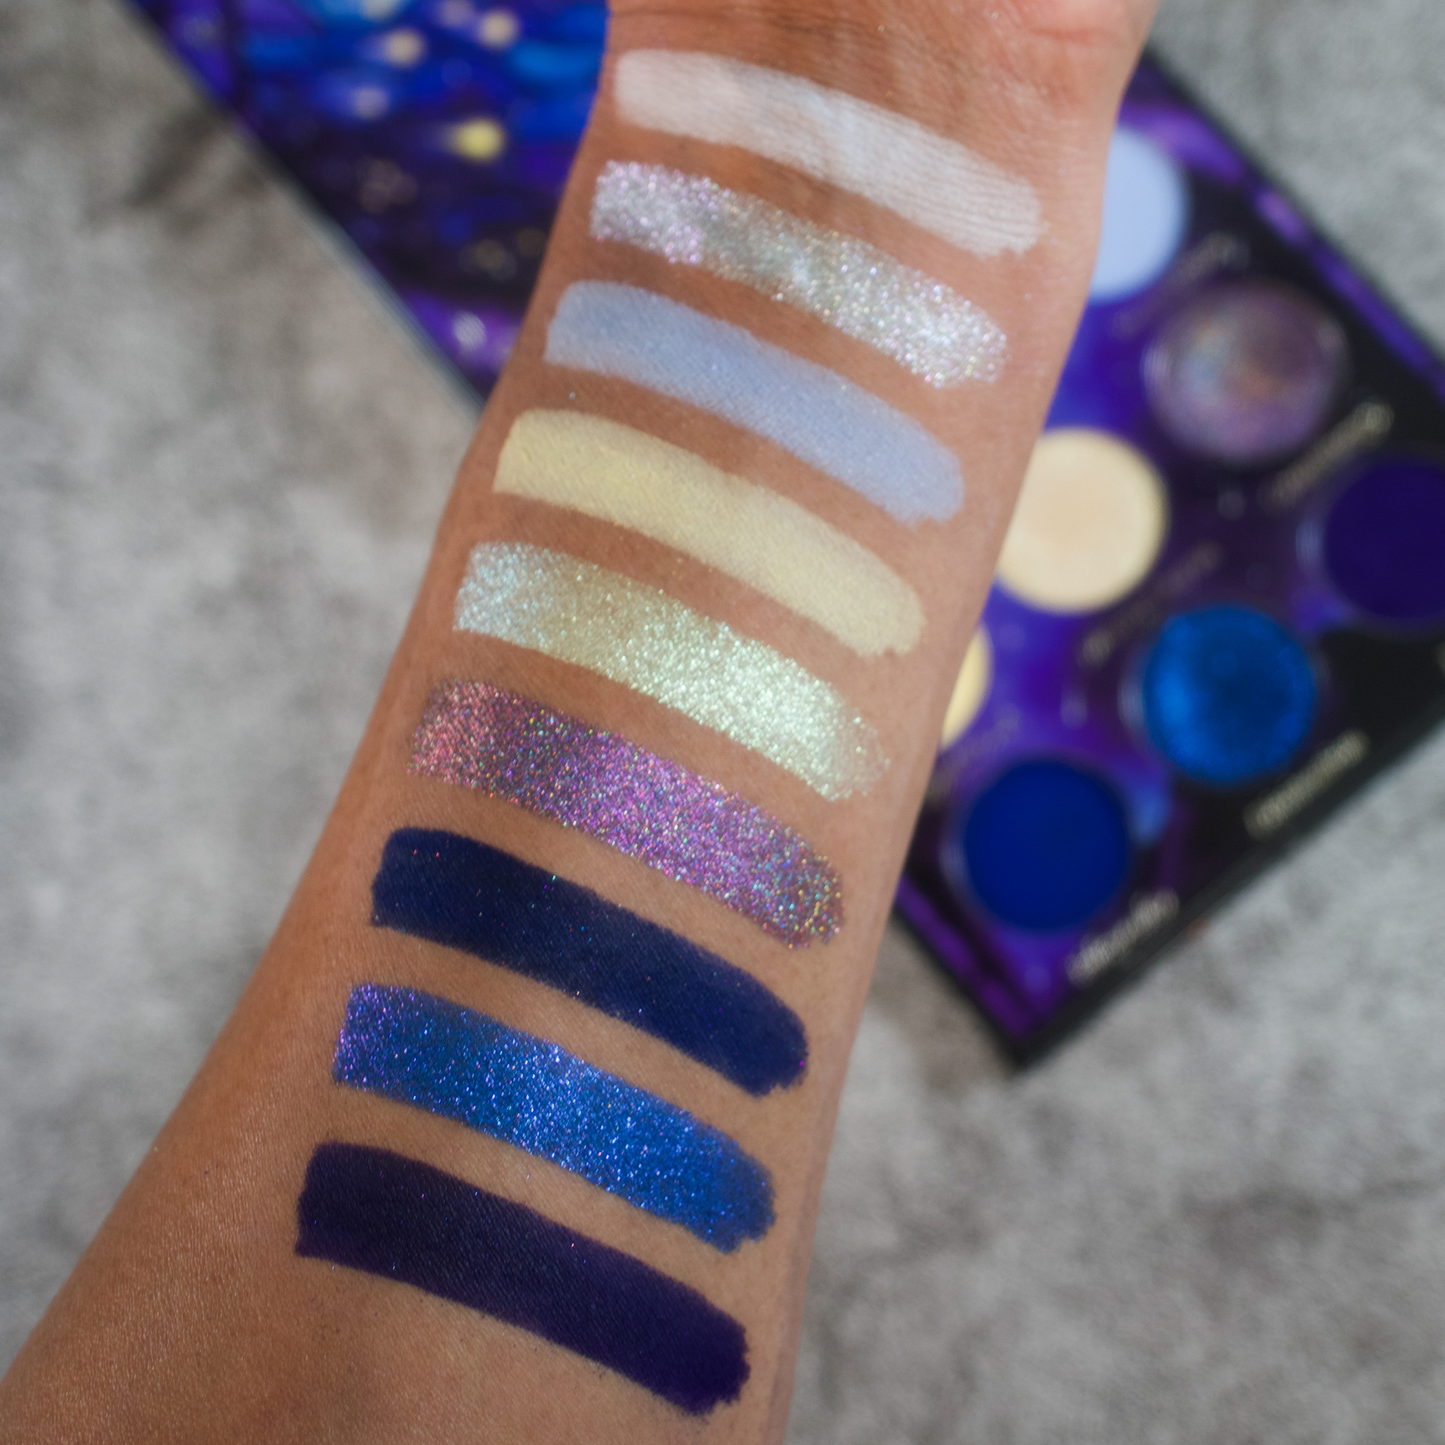 Wizard eyeshadow palette by Fantasy Cosmetica swatches